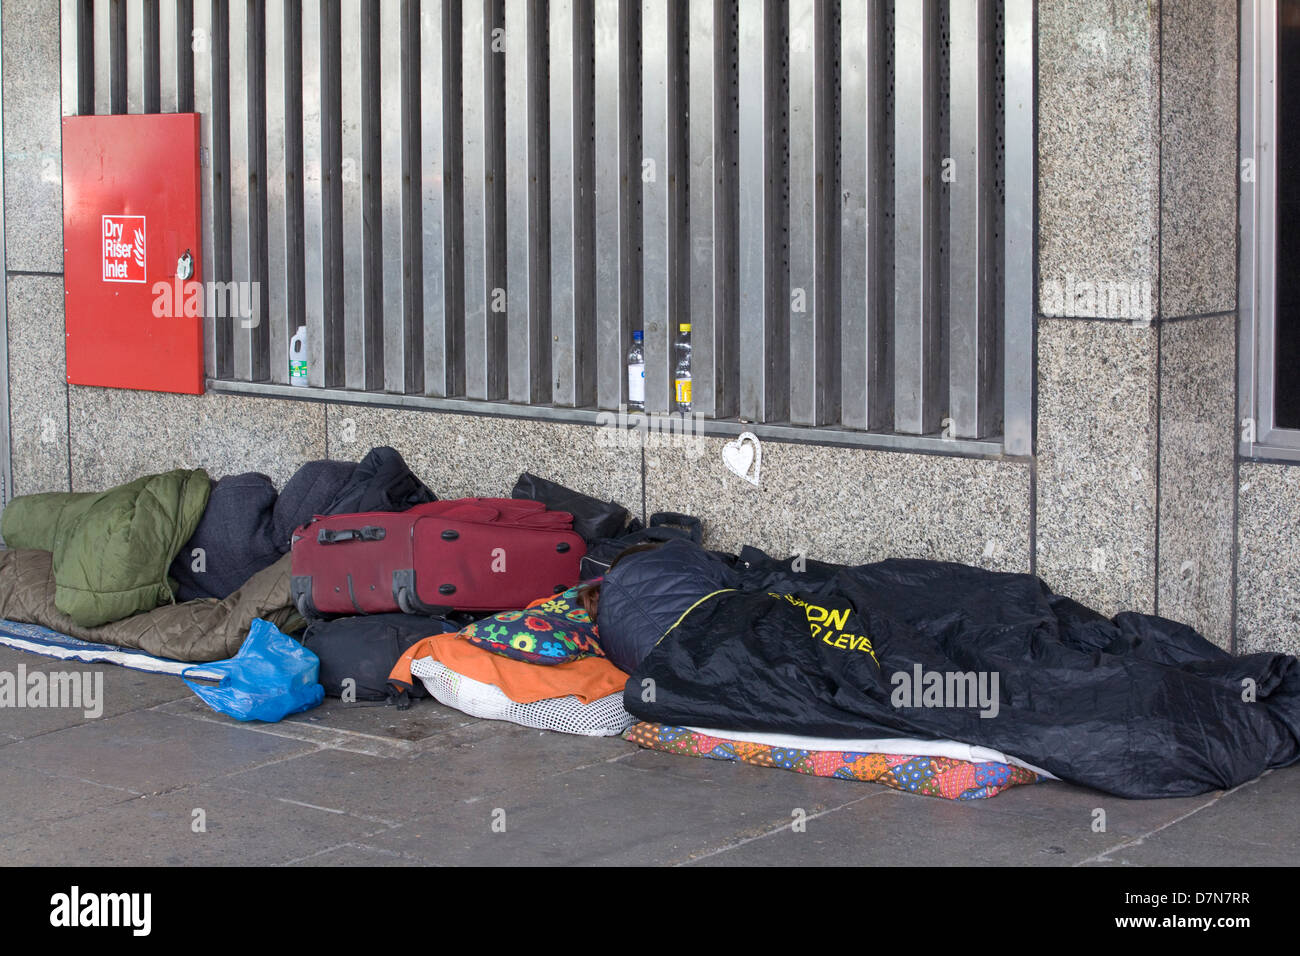 Homeless People  sleeping on the streets of London England Wrapped up against the cold in Sleeping Bags Stock Photo